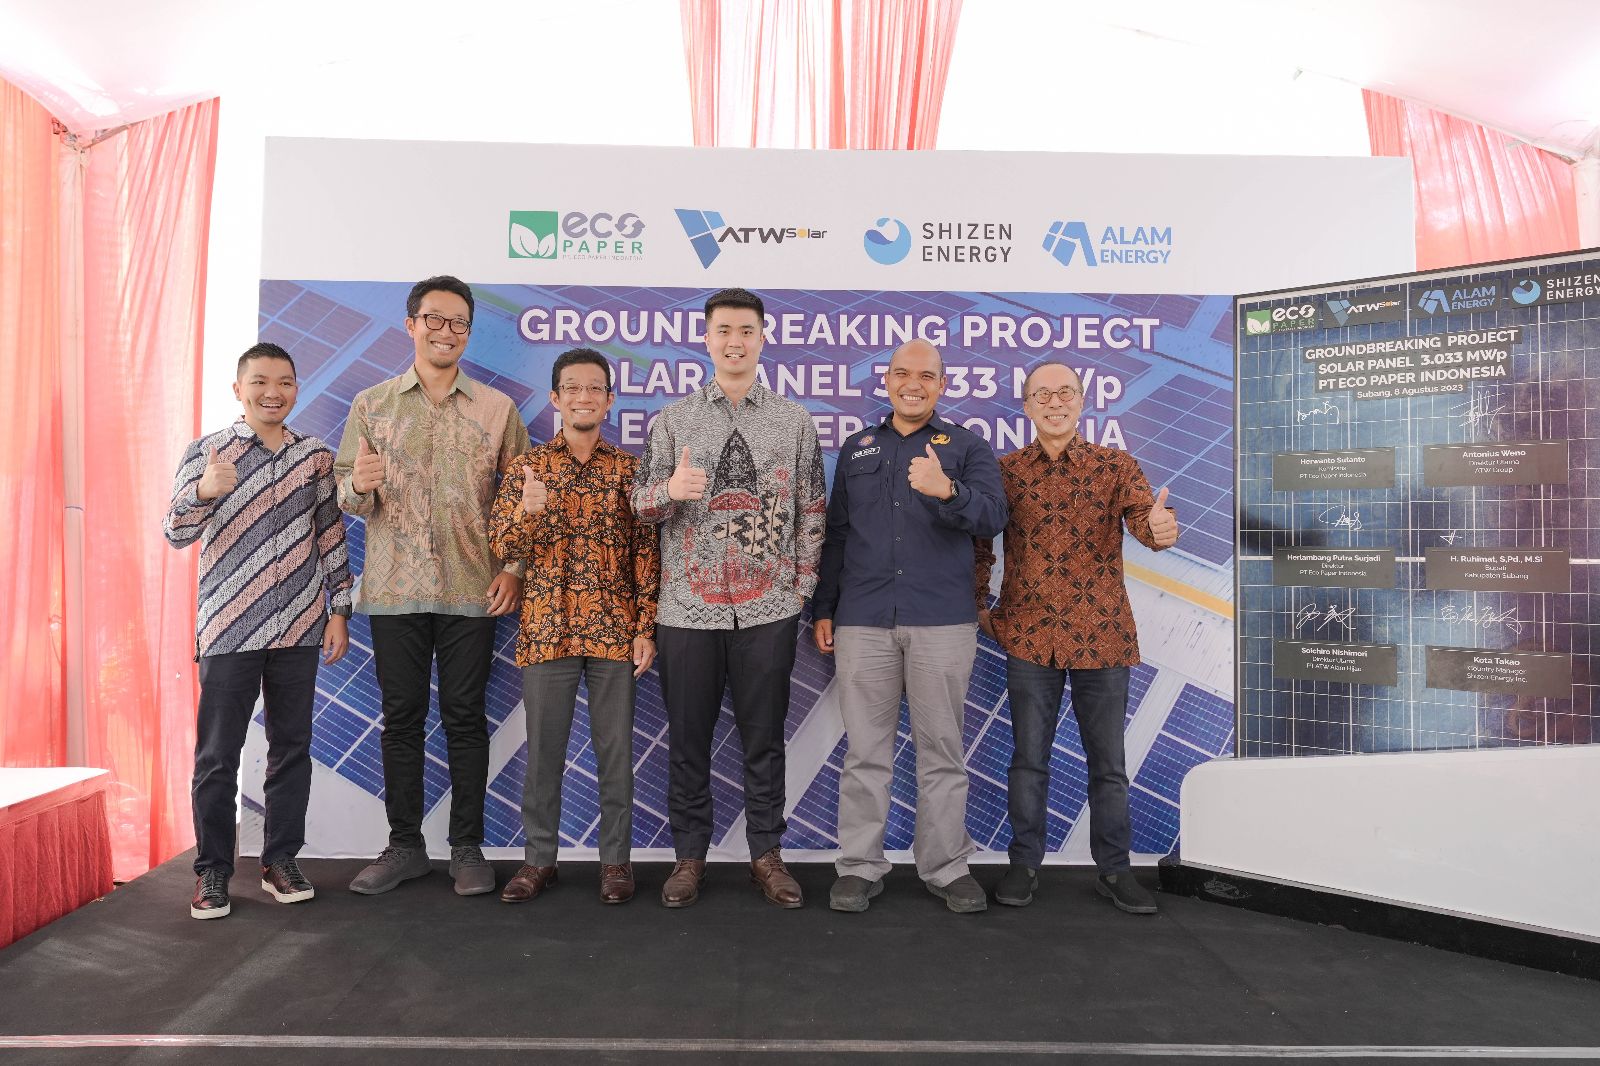 Alamport via Alam Energy received the order of 3MW Rooftop Solar Power Plant at Paper Mill in Indonesia